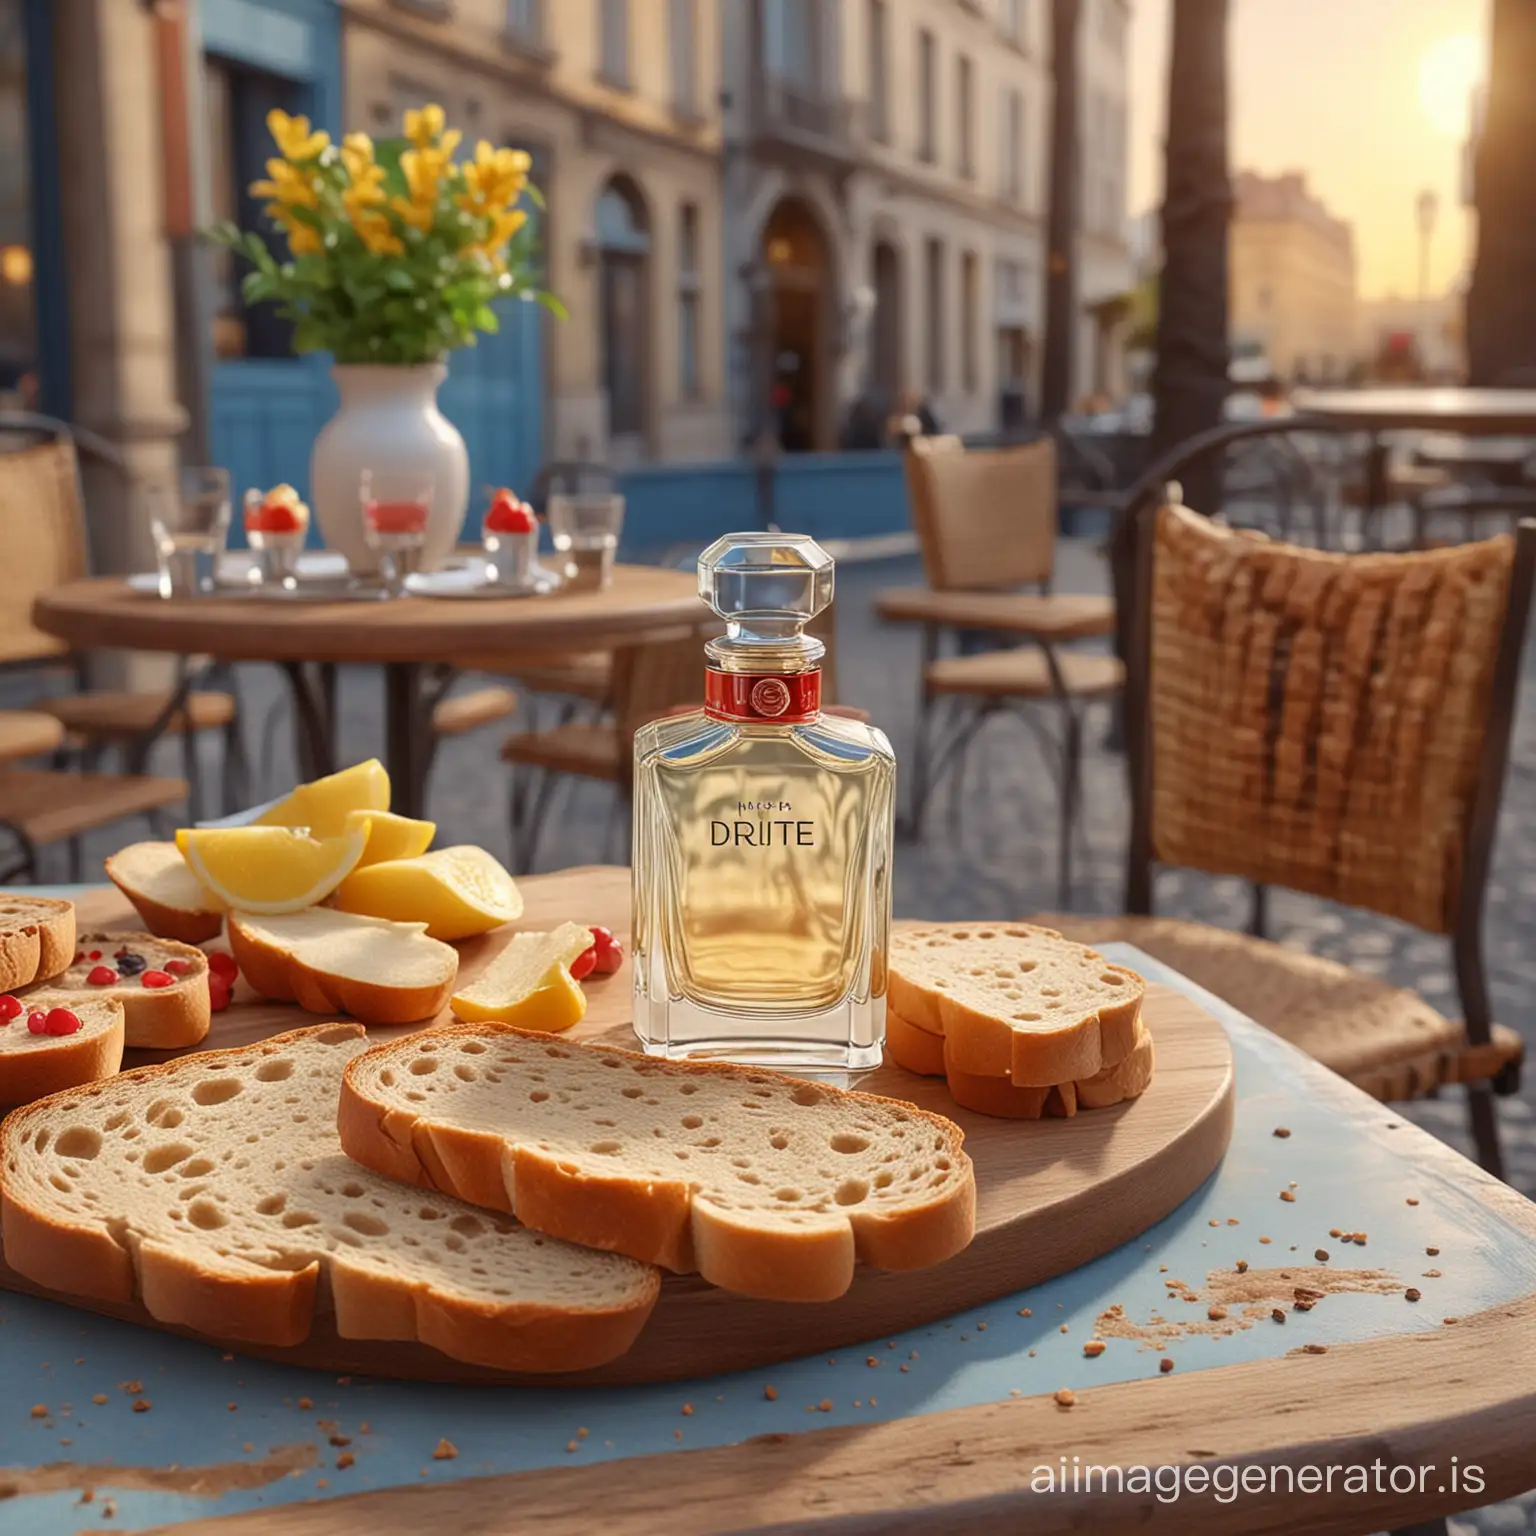 Luxury-Perfume-Product-Display-with-Fresh-Fruits-in-Charming-Parisian-Caf-Setting